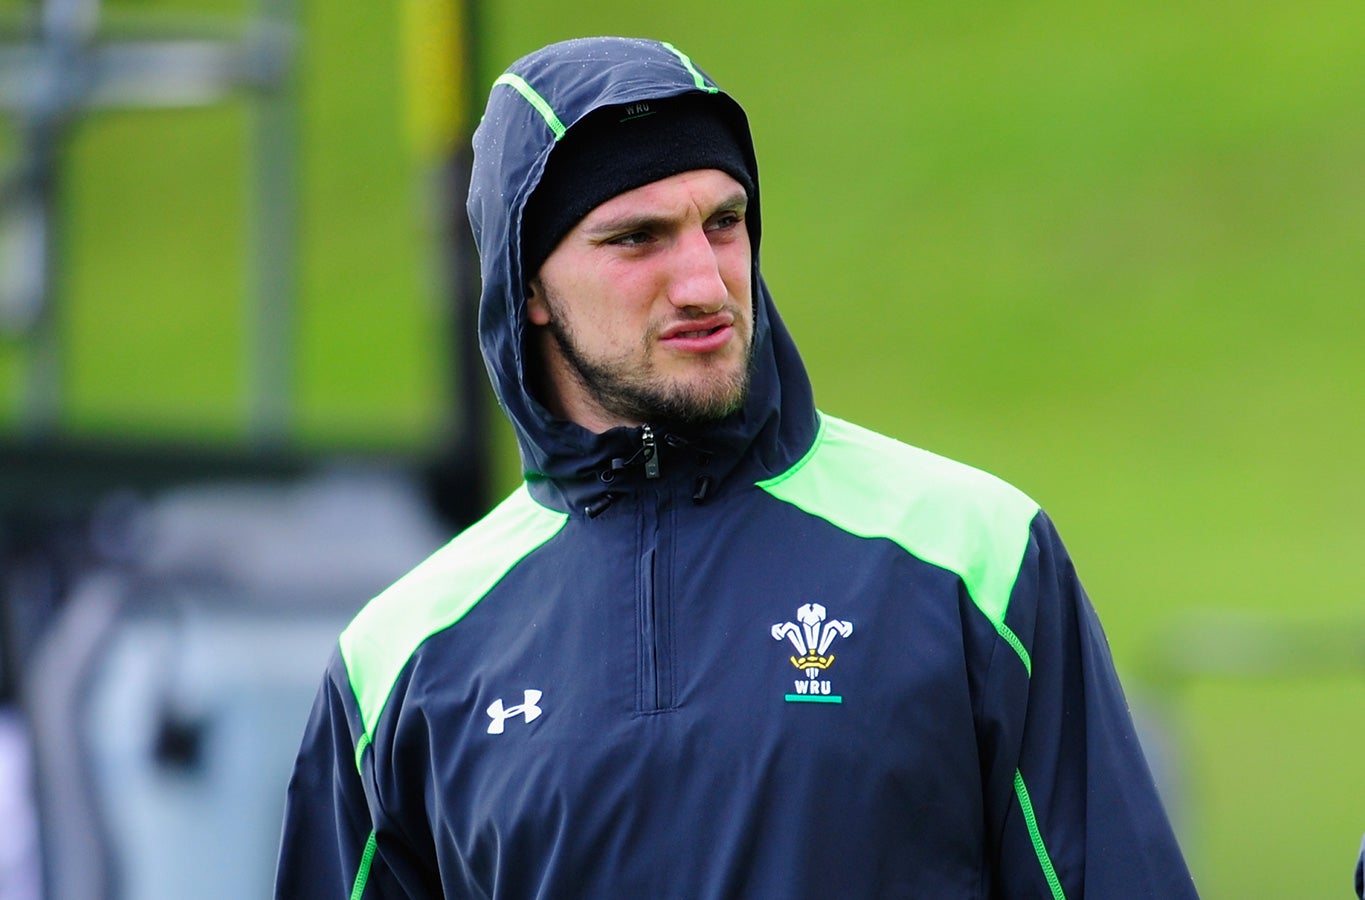 Sam Warburton is set to captain Wales for the 33rd time